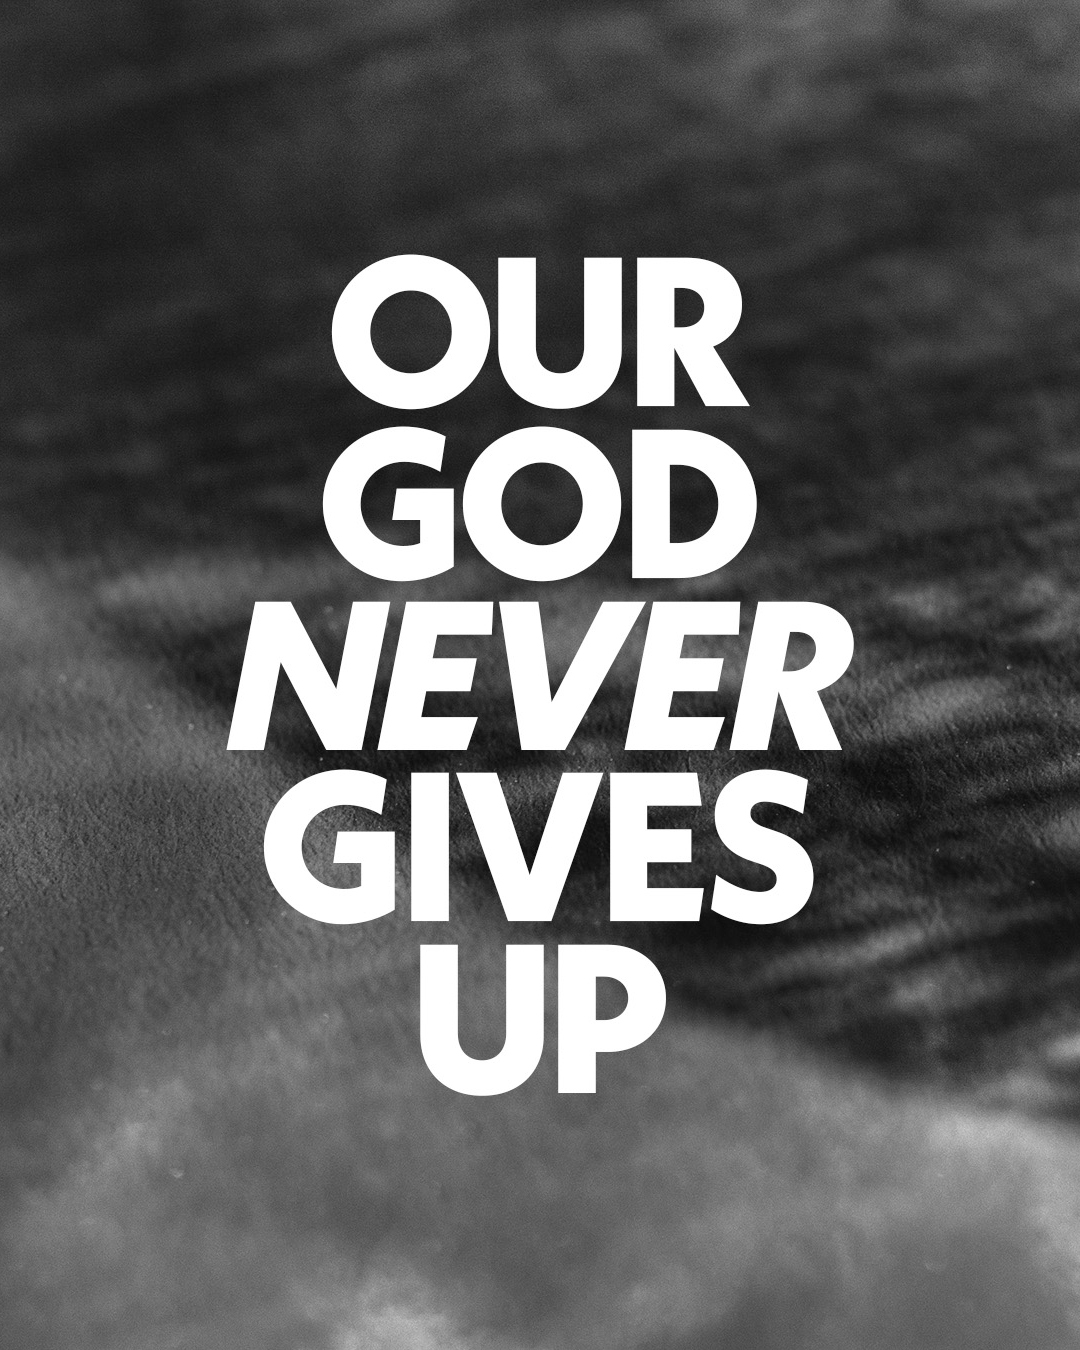 Our God never gives up